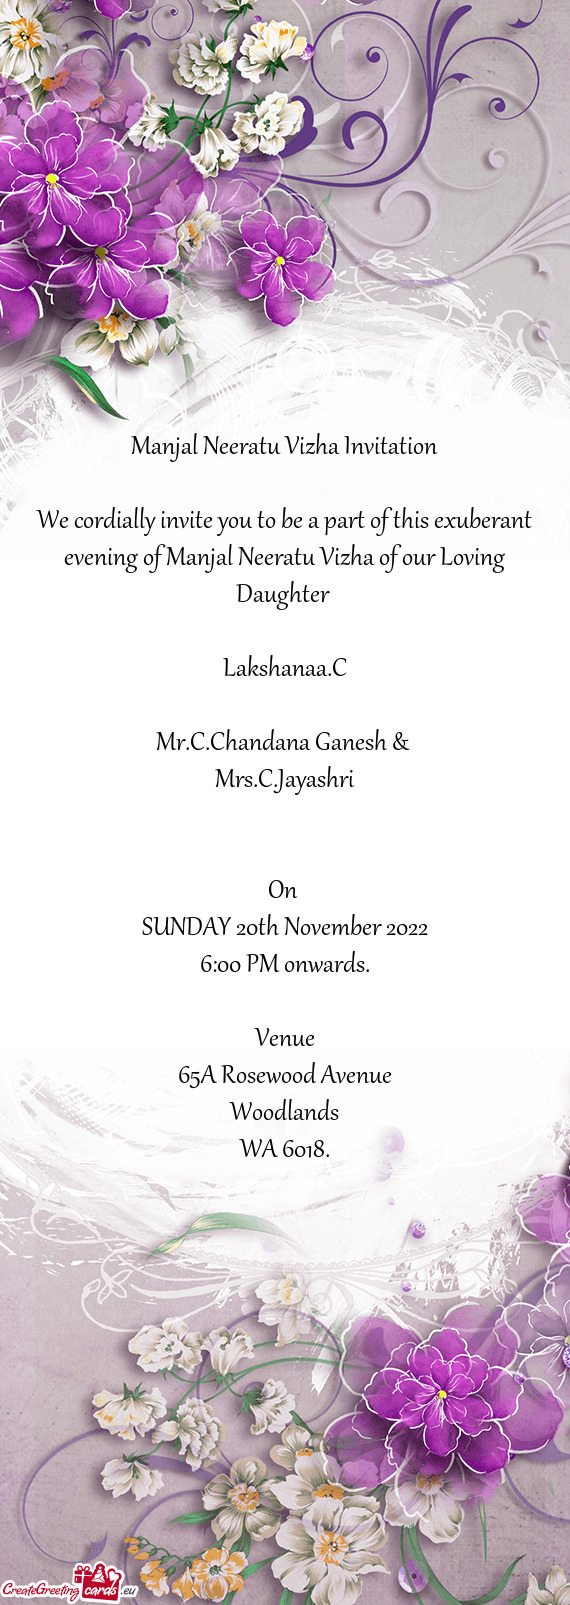 We cordially invite you to be a part of this exuberant evening of Manjal Neeratu Vizha of our Loving